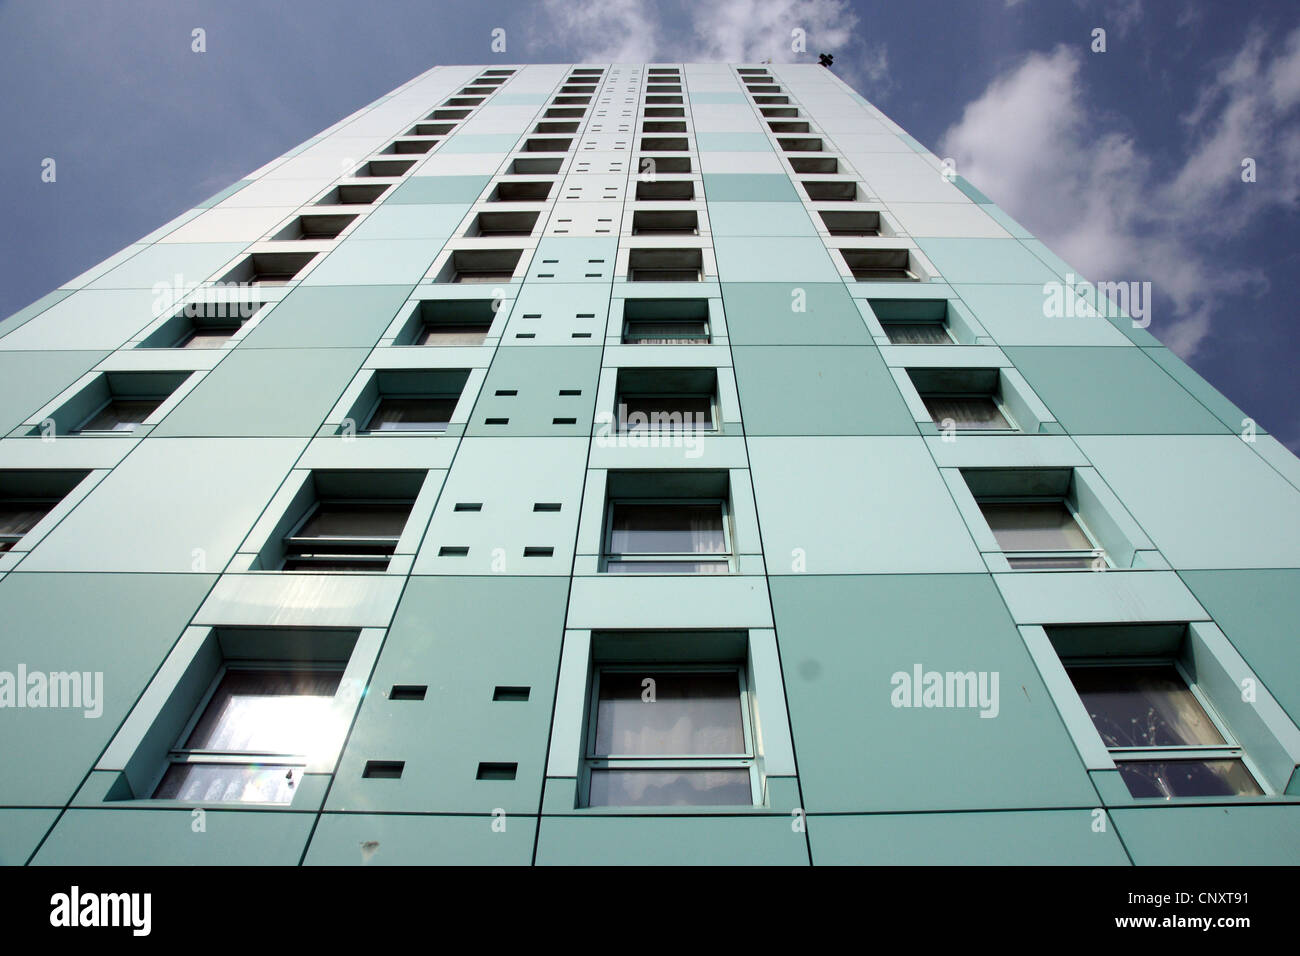 Multi-story flats with external cladding  social housing Stock Photo